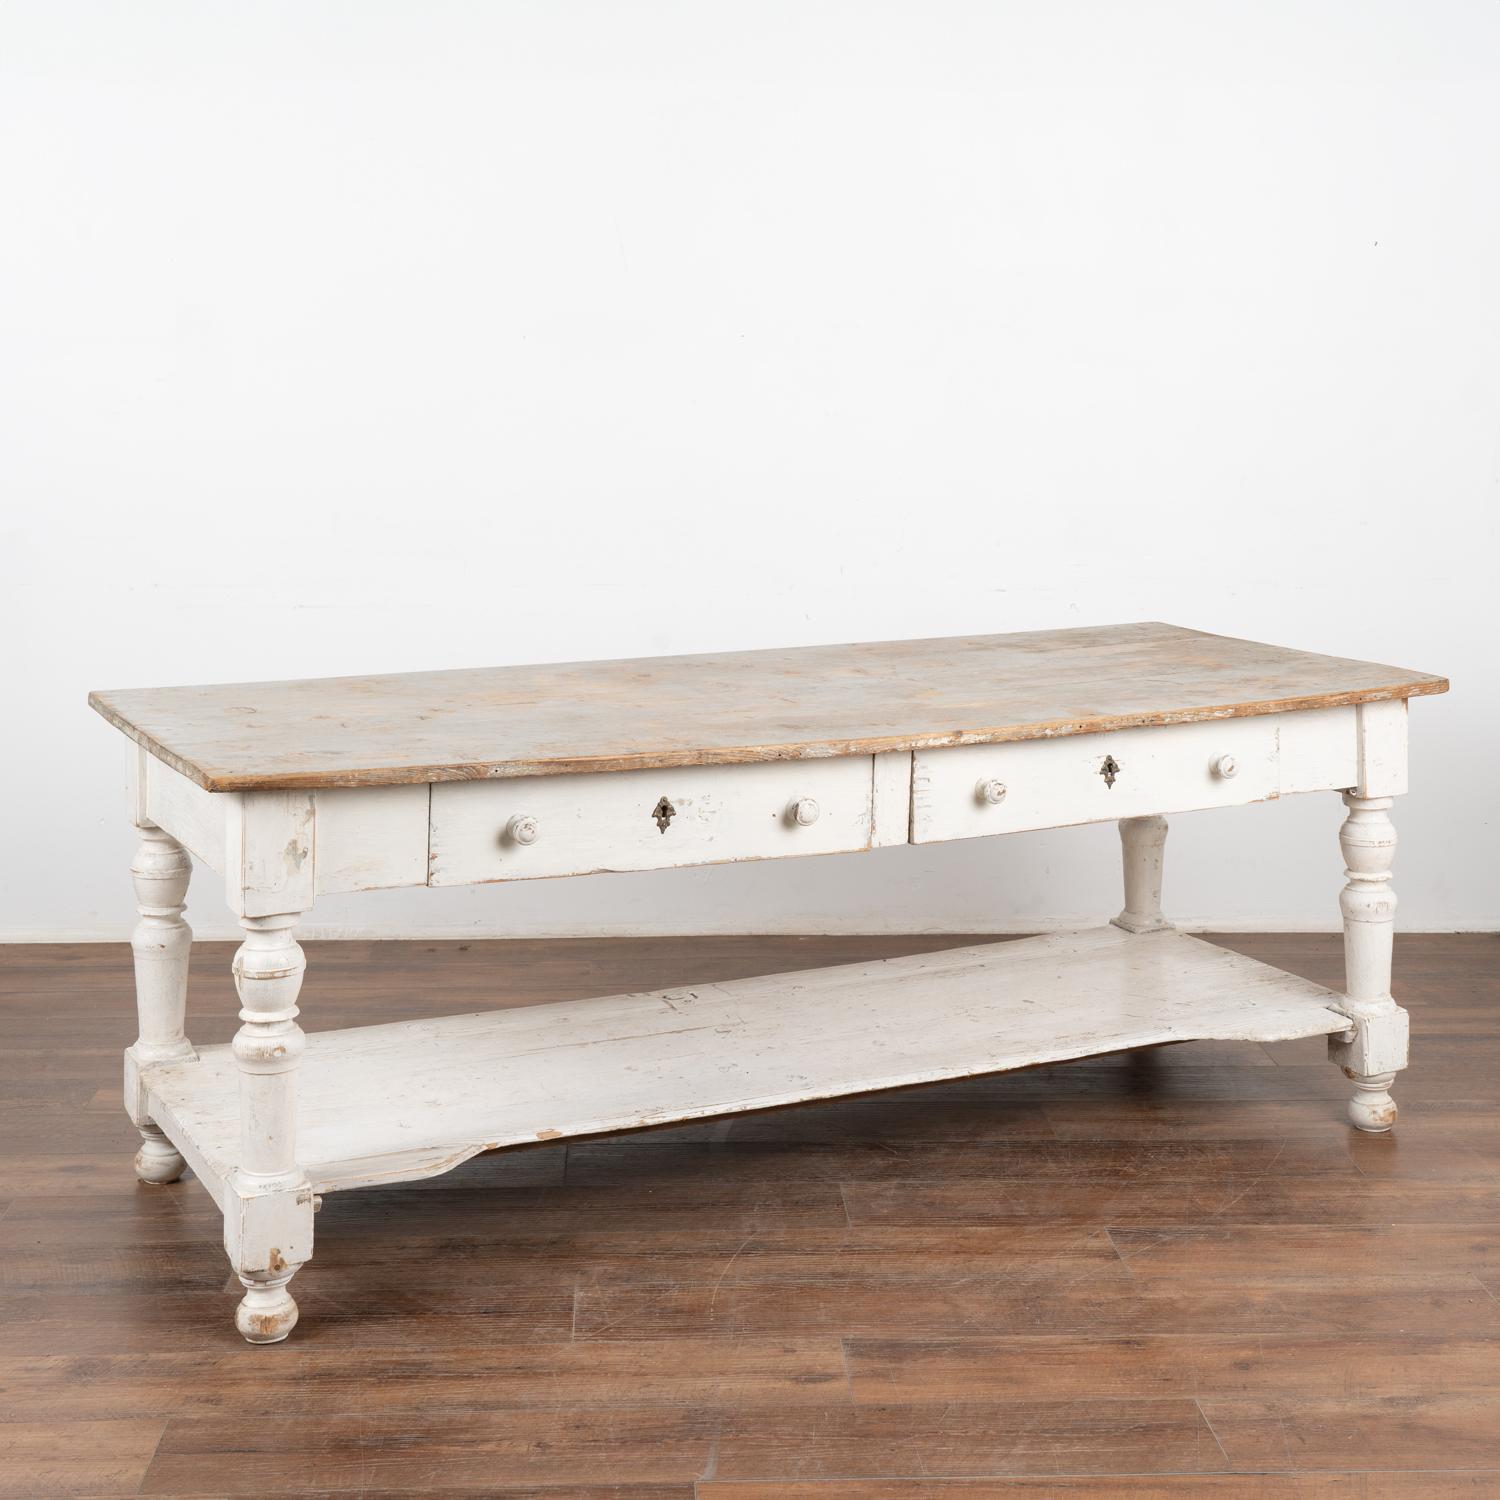 It is the years of use that fill this white painted work table with character and purpose. At 6.5' long with a lower shelf and two large drawers it is ideal for a modern kitchen island.
The gray painted top reveals generations of use in the